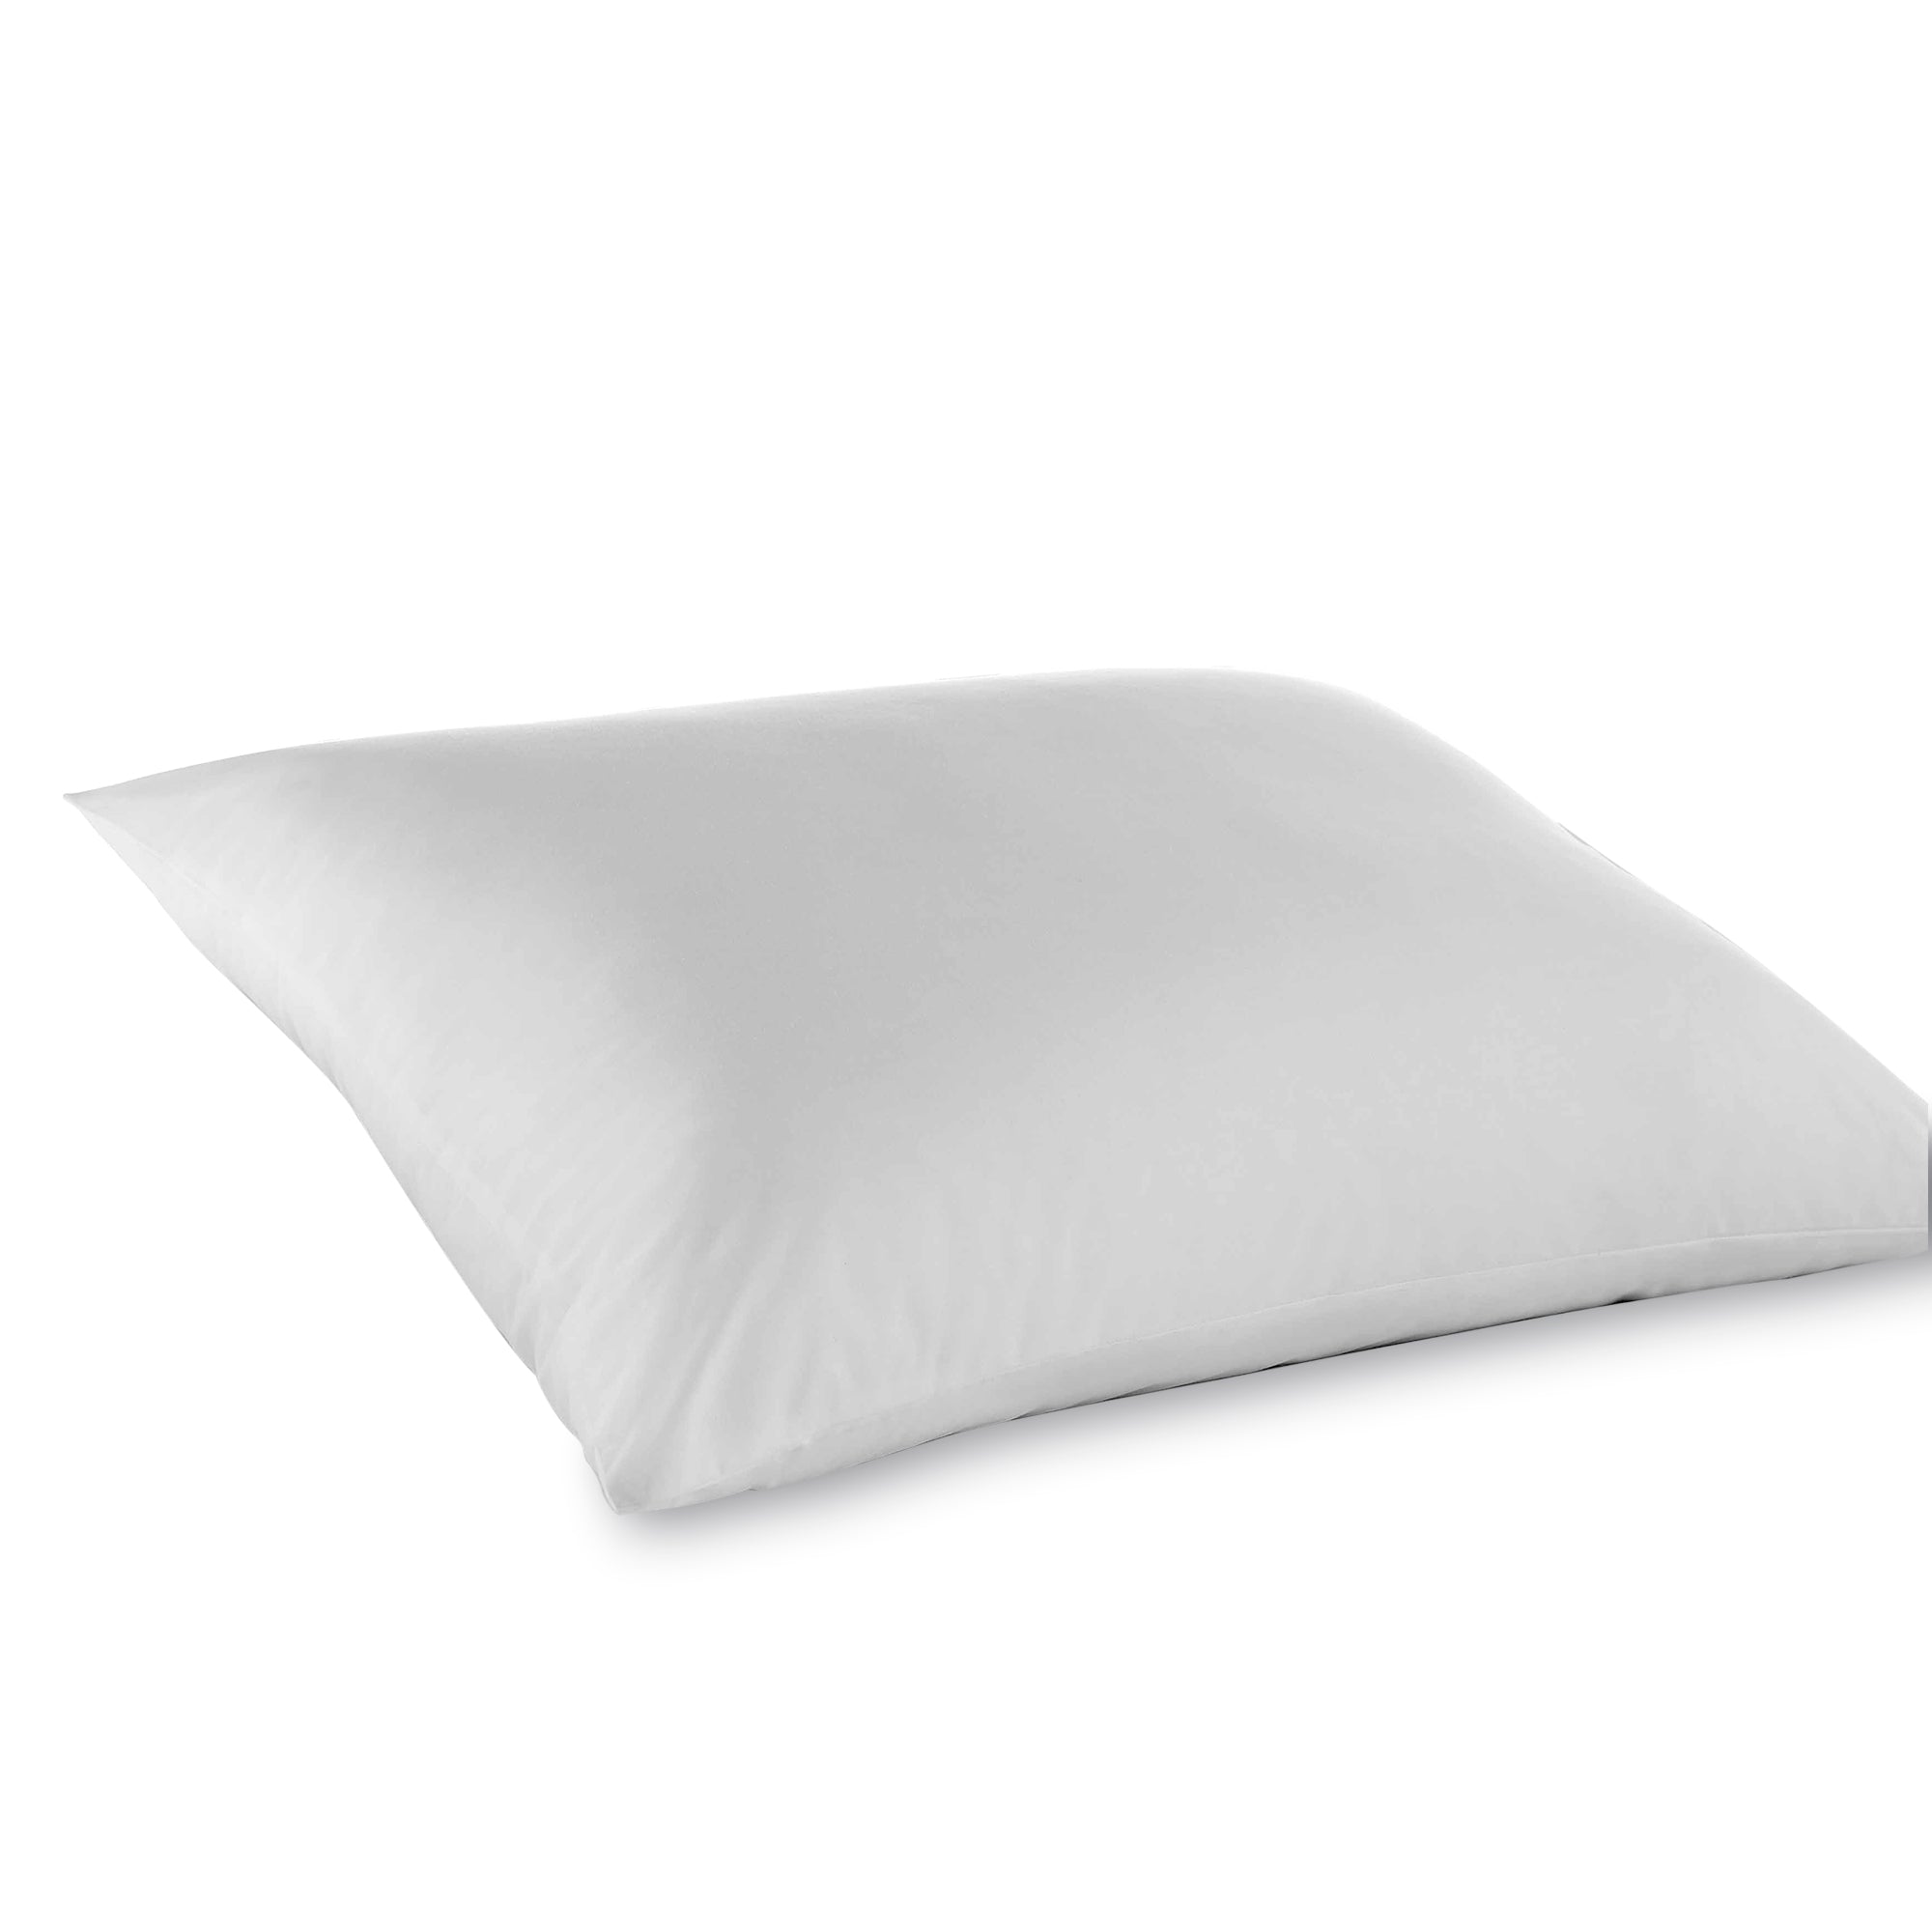 Chaps Duck Down Medium/Firm Support Bed Pillow with Cotton Cover, King